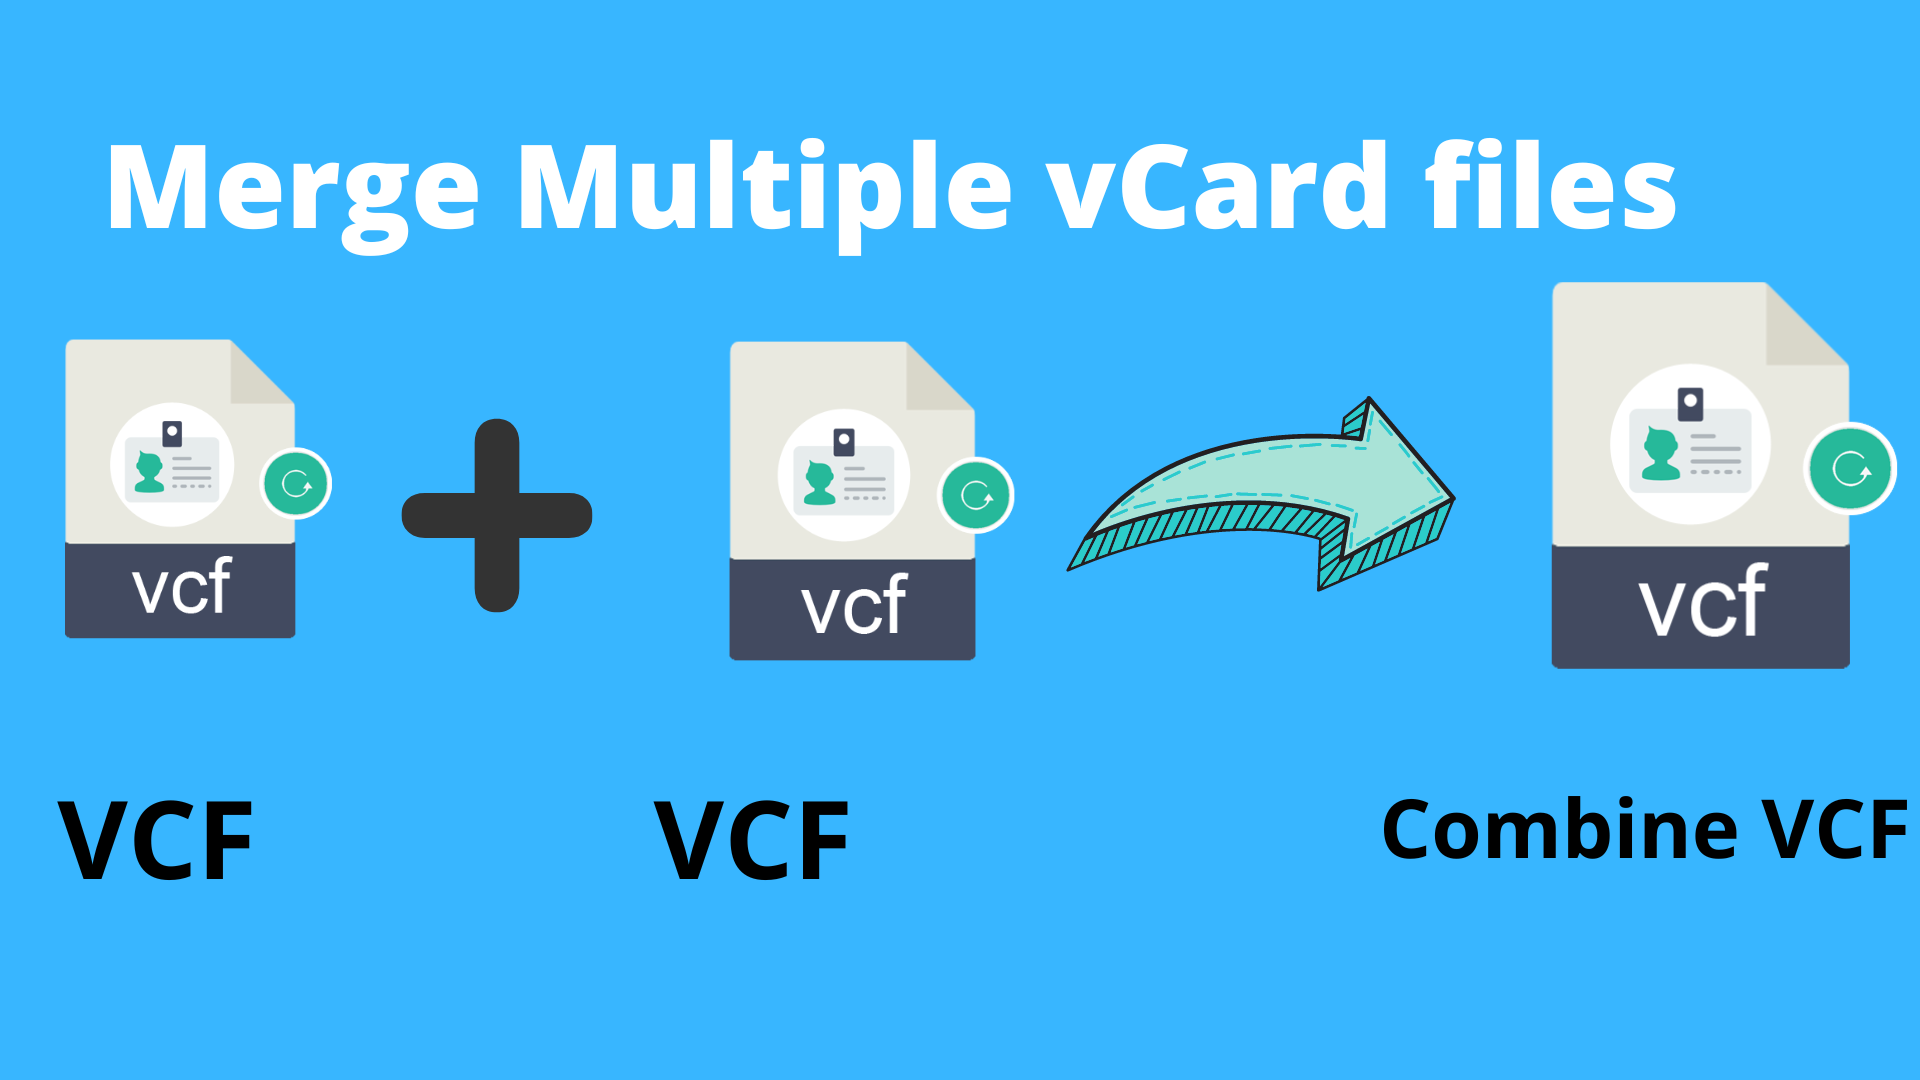 How to Merge Multiple vCard files into One